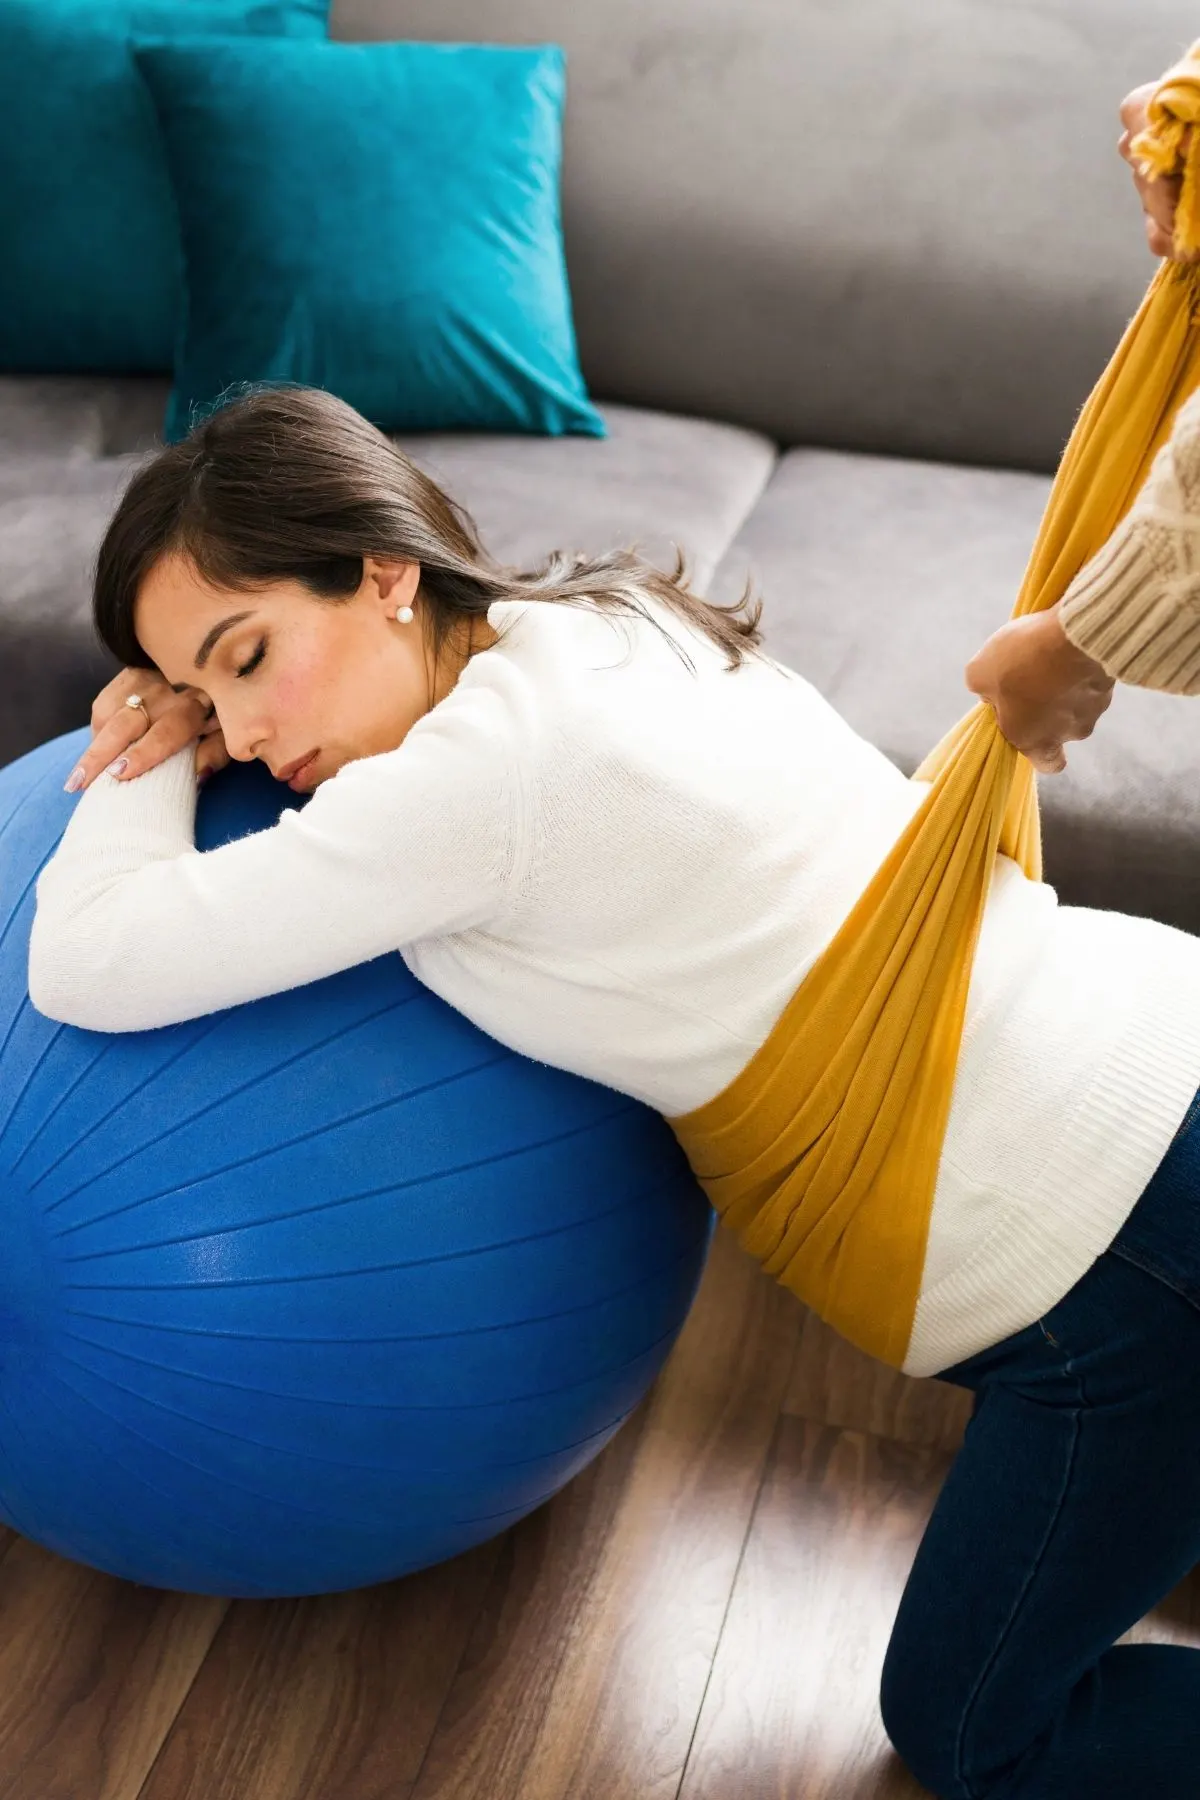 Woman leans over birthing ball while her midwife relieves her stomach pain with rebozo scarf.